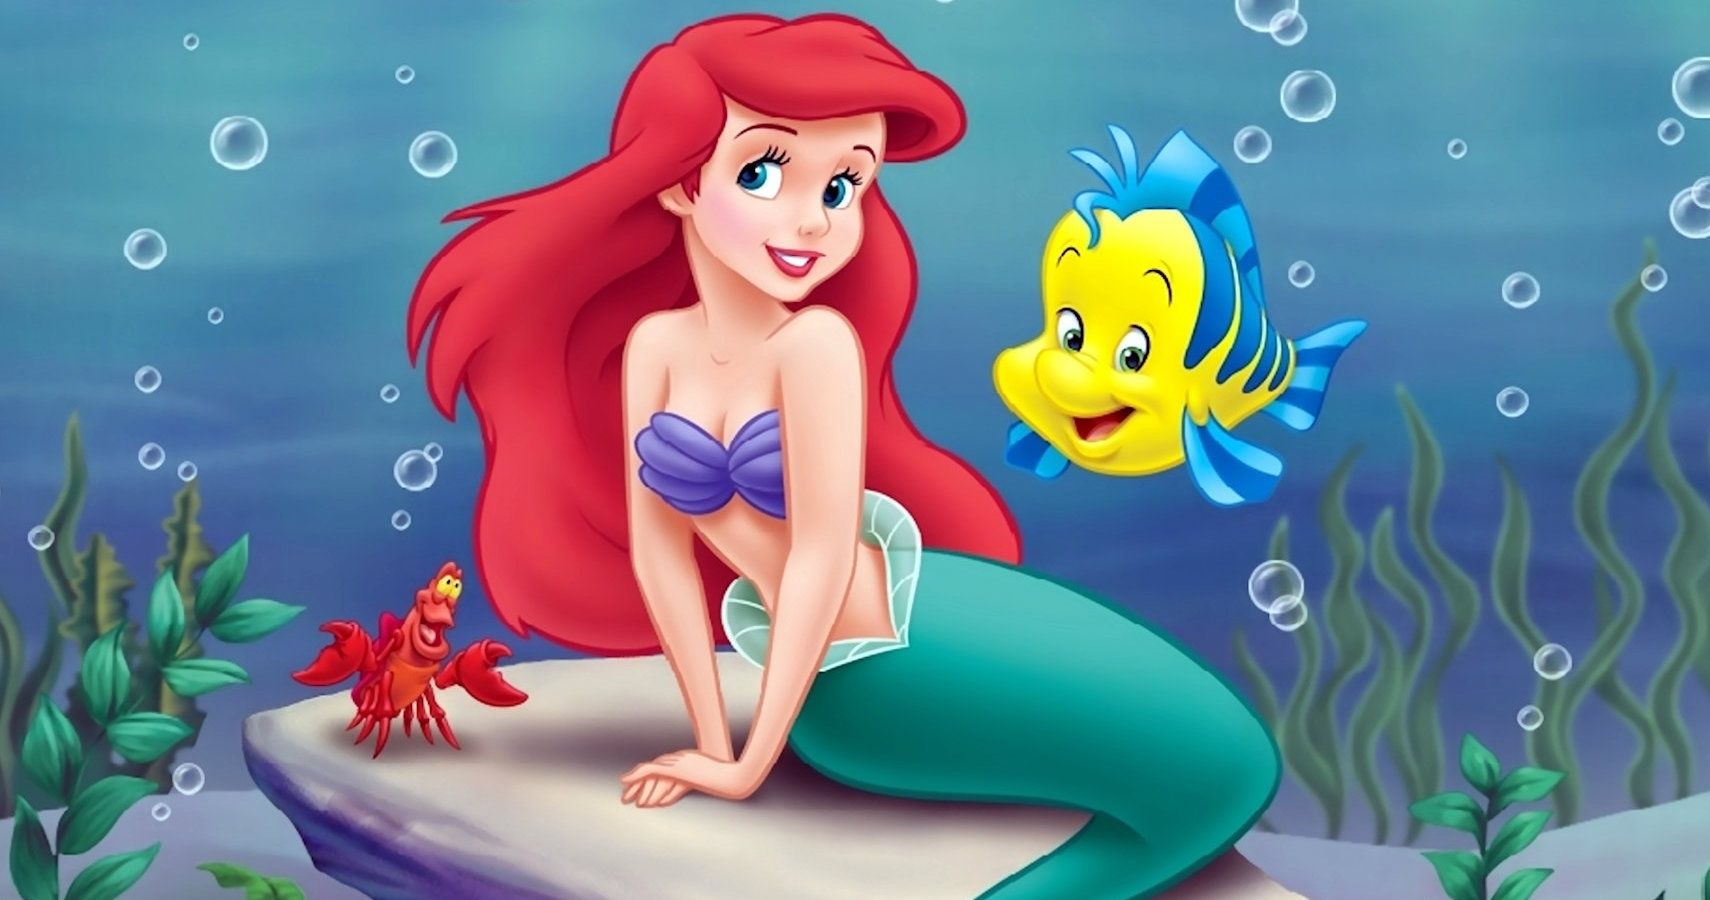 The Little Mermaid: 10 Most Inspirational Quotes